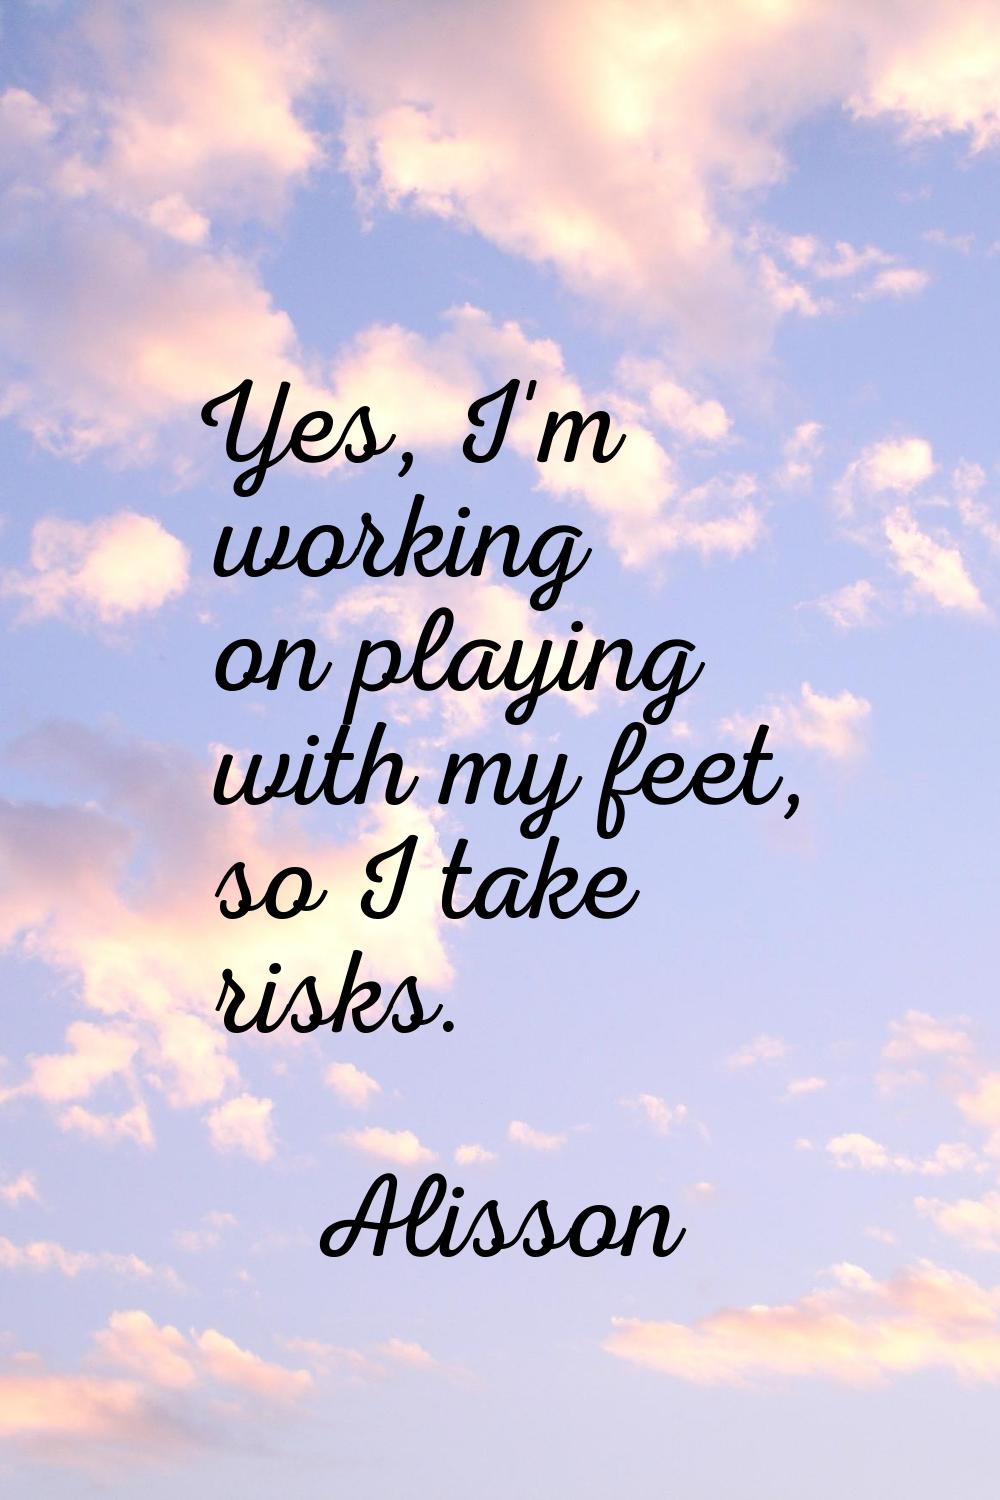 Yes, I'm working on playing with my feet, so I take risks.